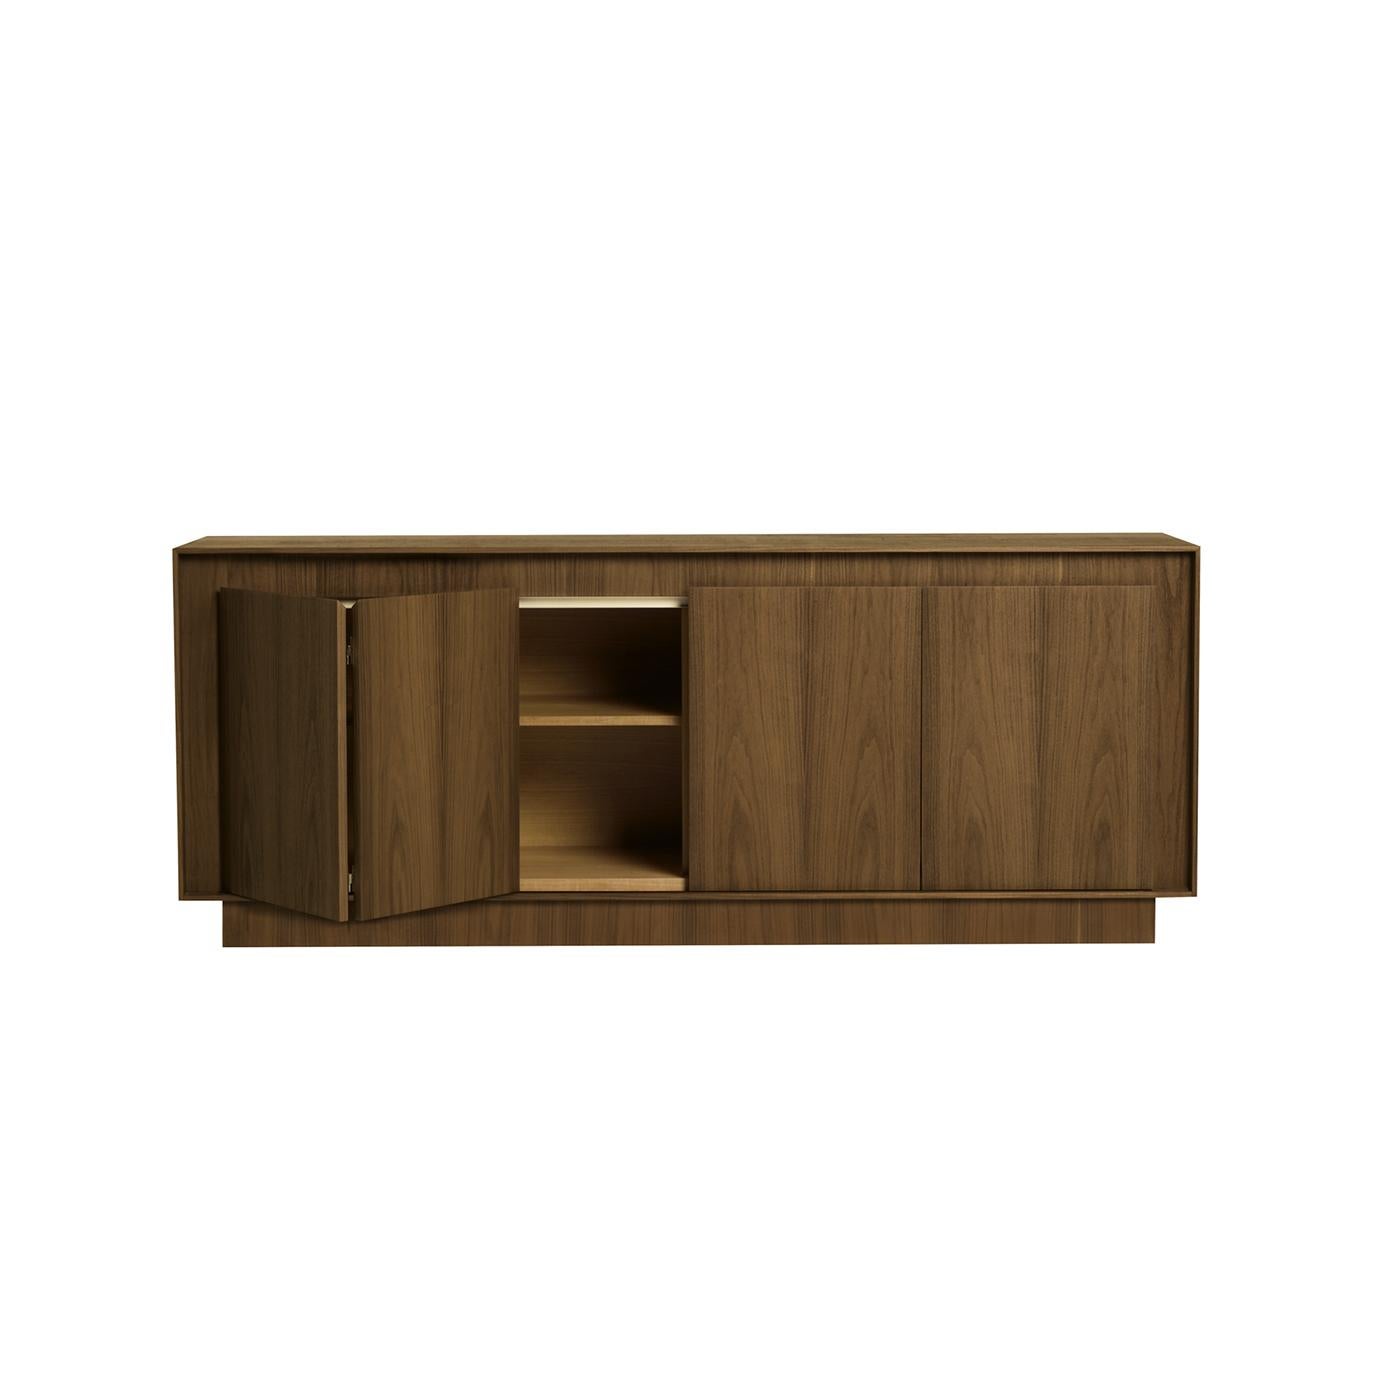 This classy, rectangular wood cabinet has a little surprise up its sleeve with four hinged folding doors that open up to reveal internal shelving for practical storage of items. A poplar and composite wood structure and beautiful walnut wood